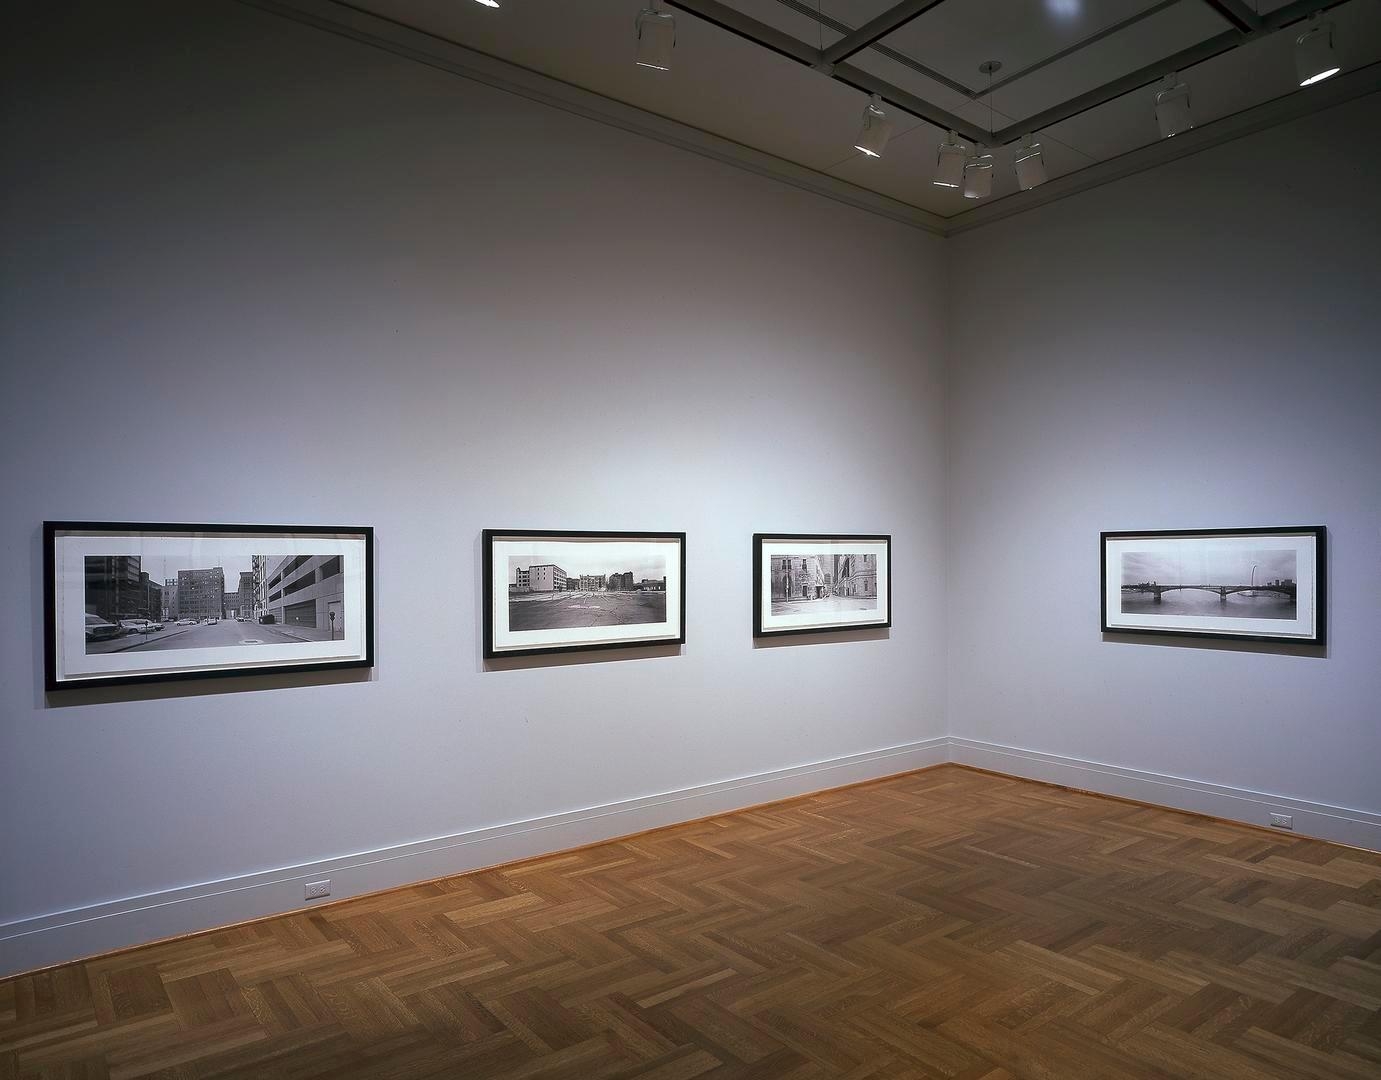  Installation view of Catherine Opie:&nbsp;in between here and there&nbsp;at the Saint Louis Art Museum, Saint Louis